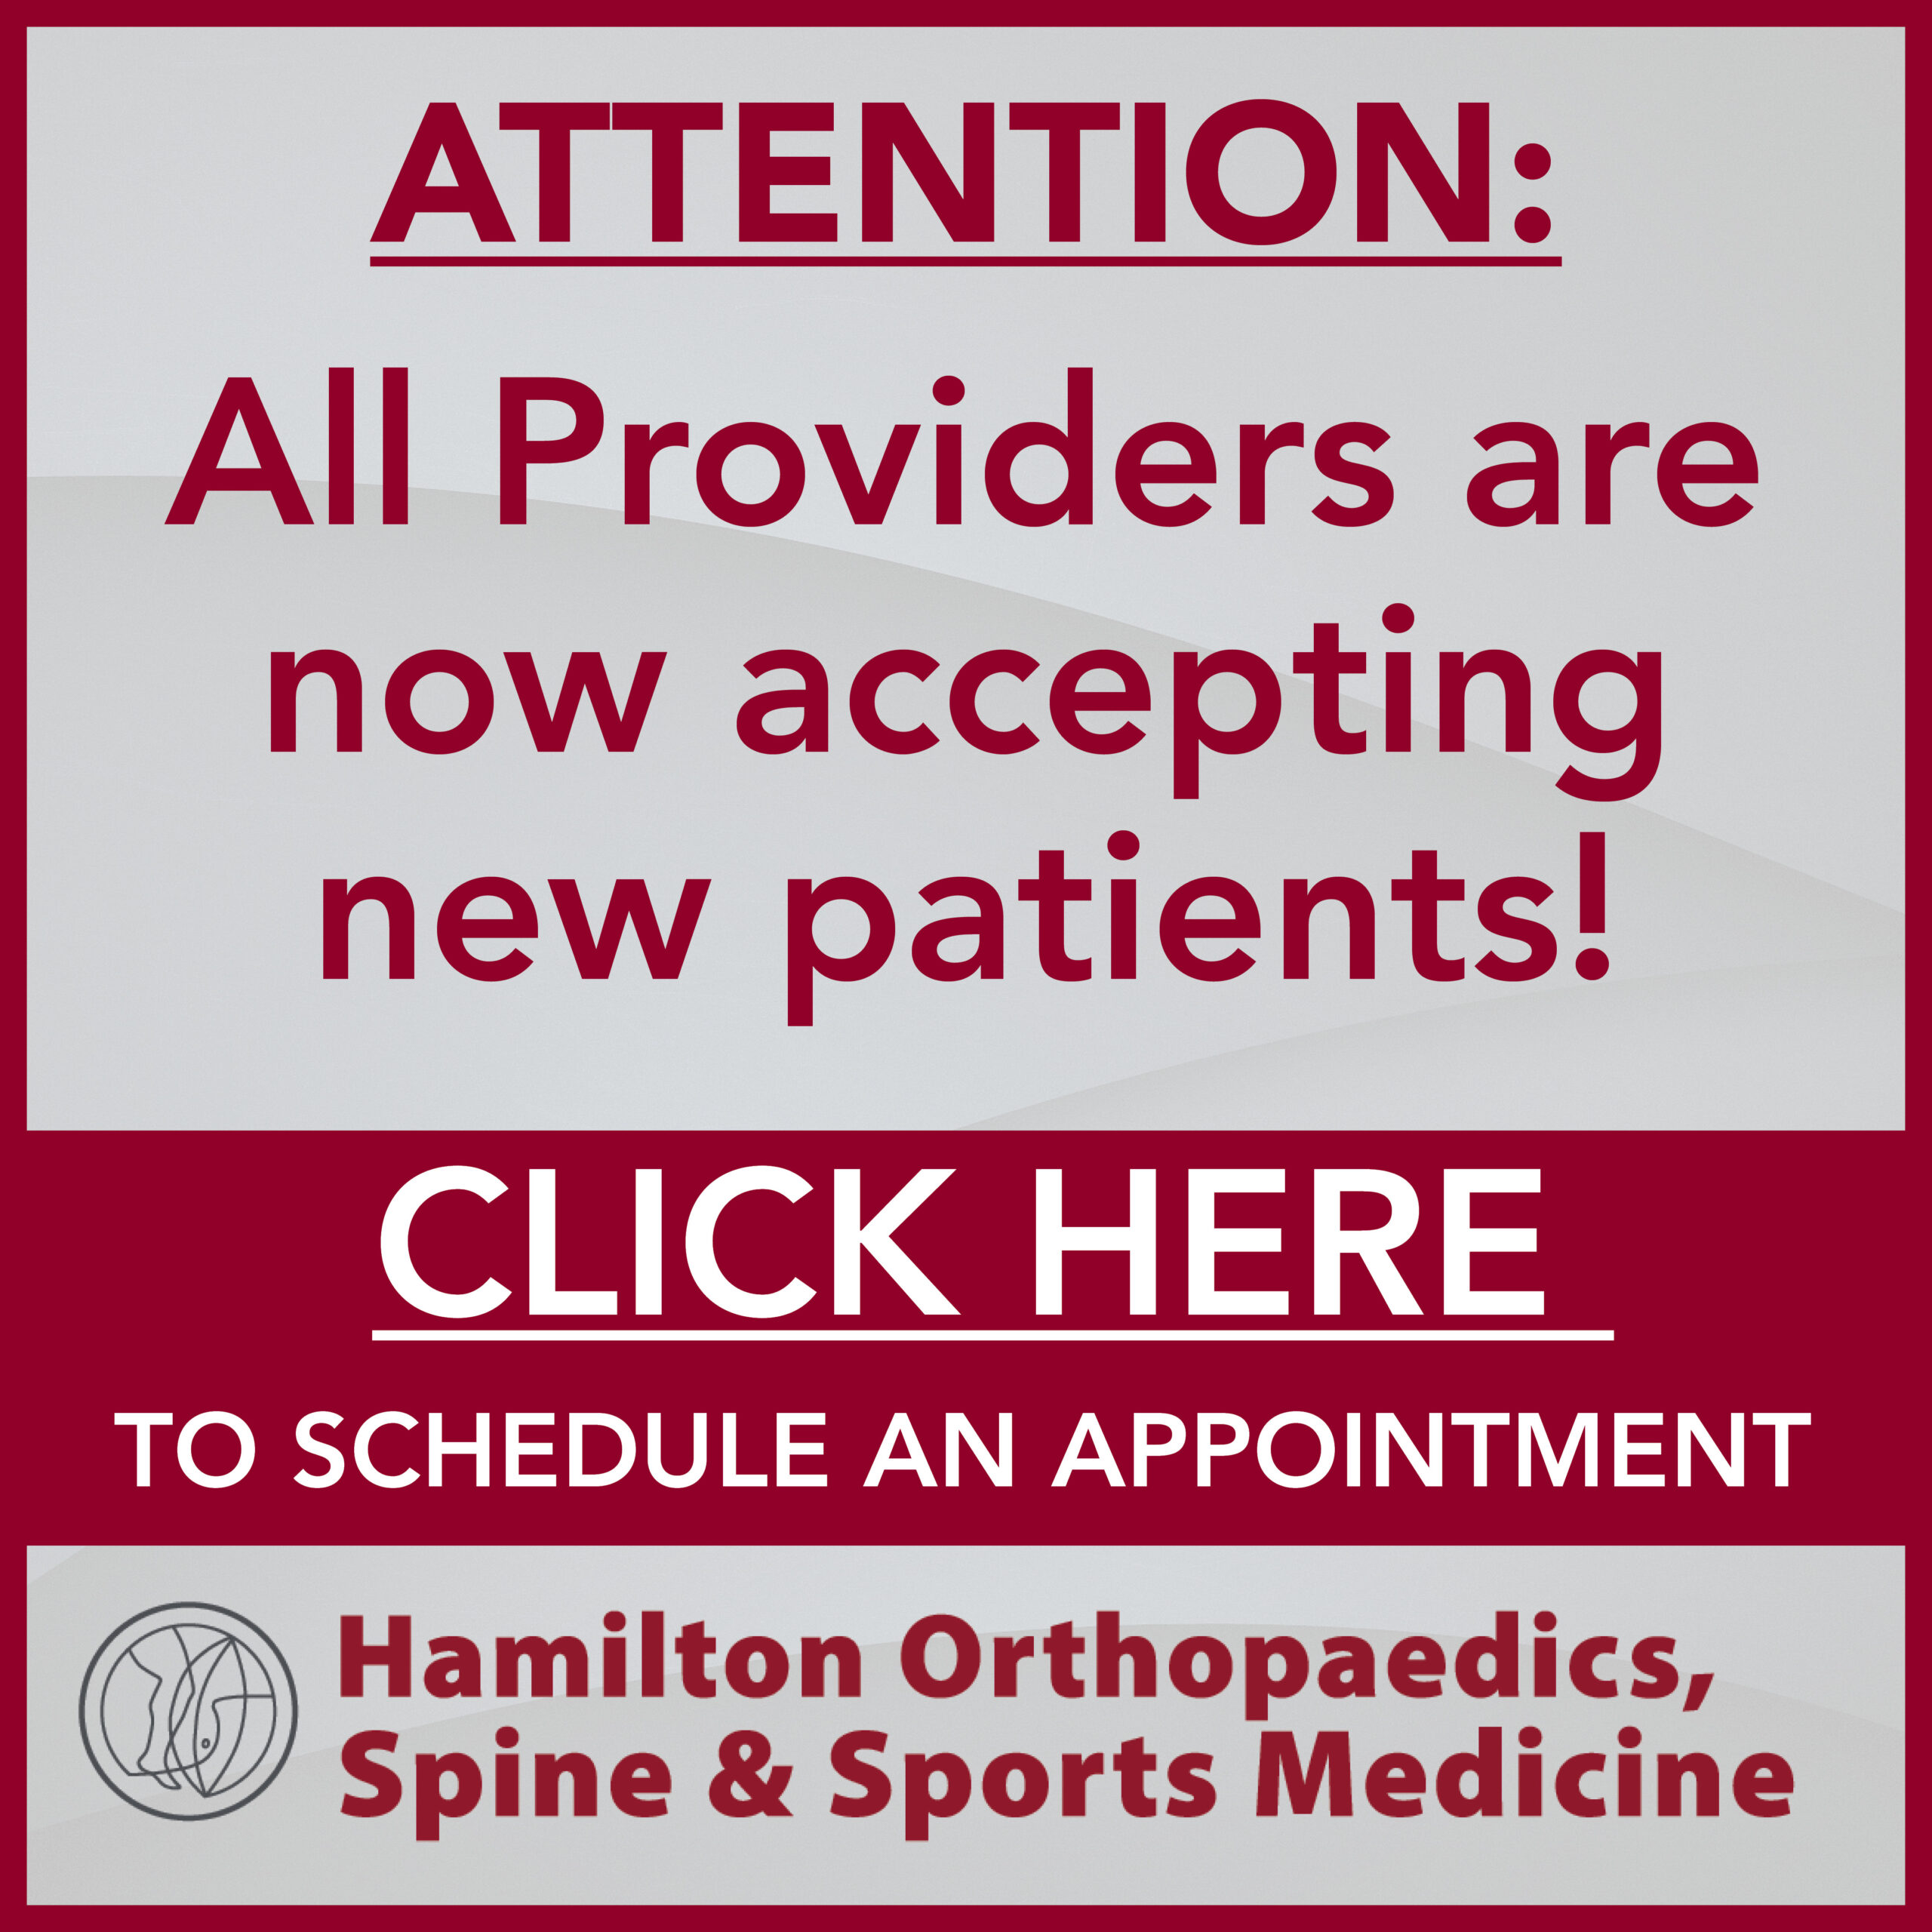 All providers are accepting new patients!